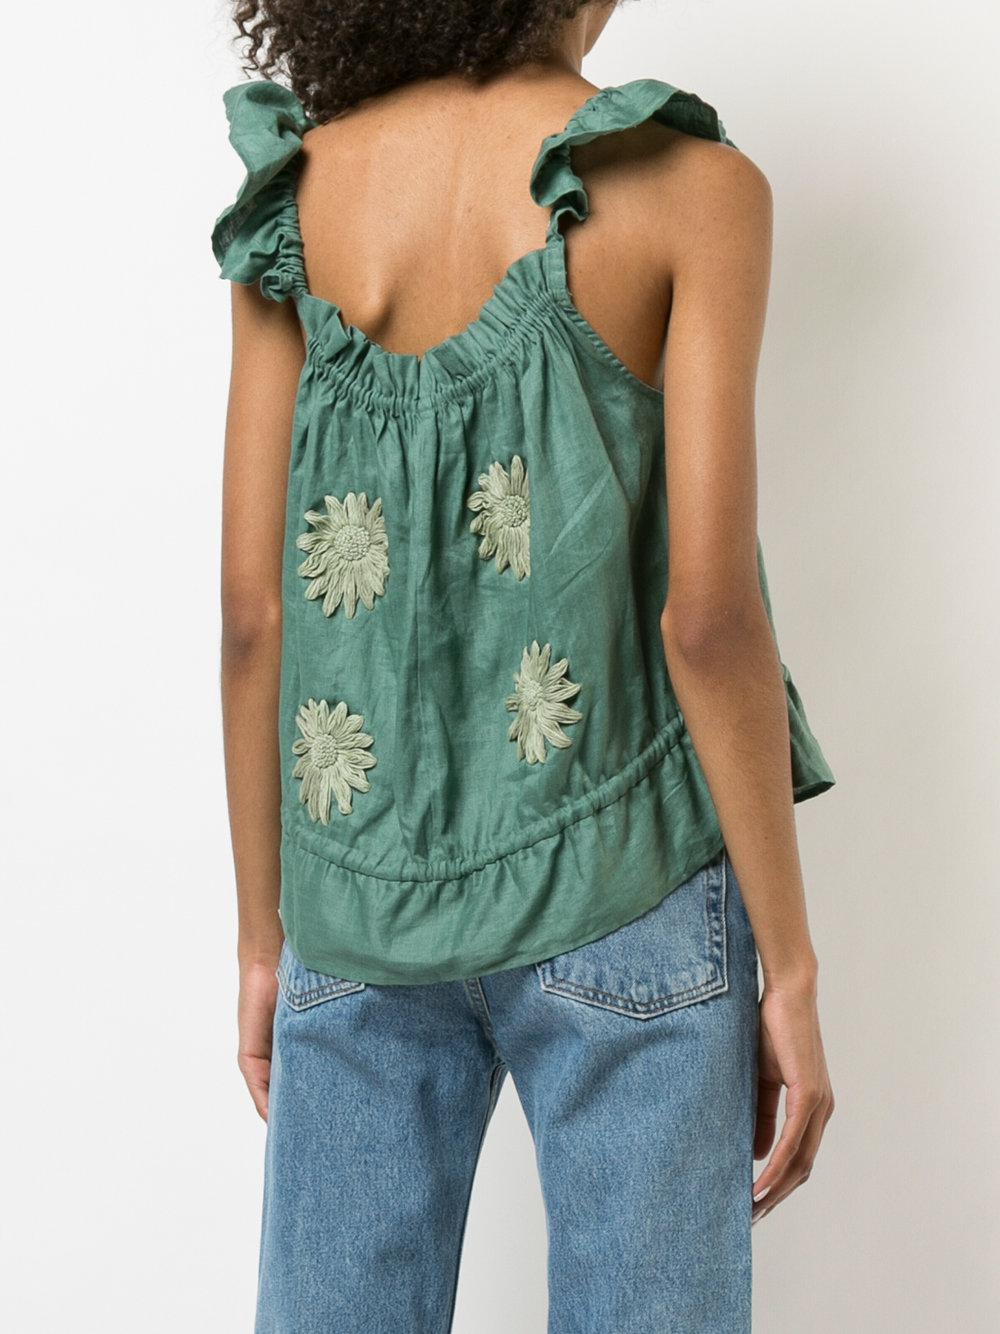 Innika Choo Linen Embroidered Floral Top in Green - Lyst